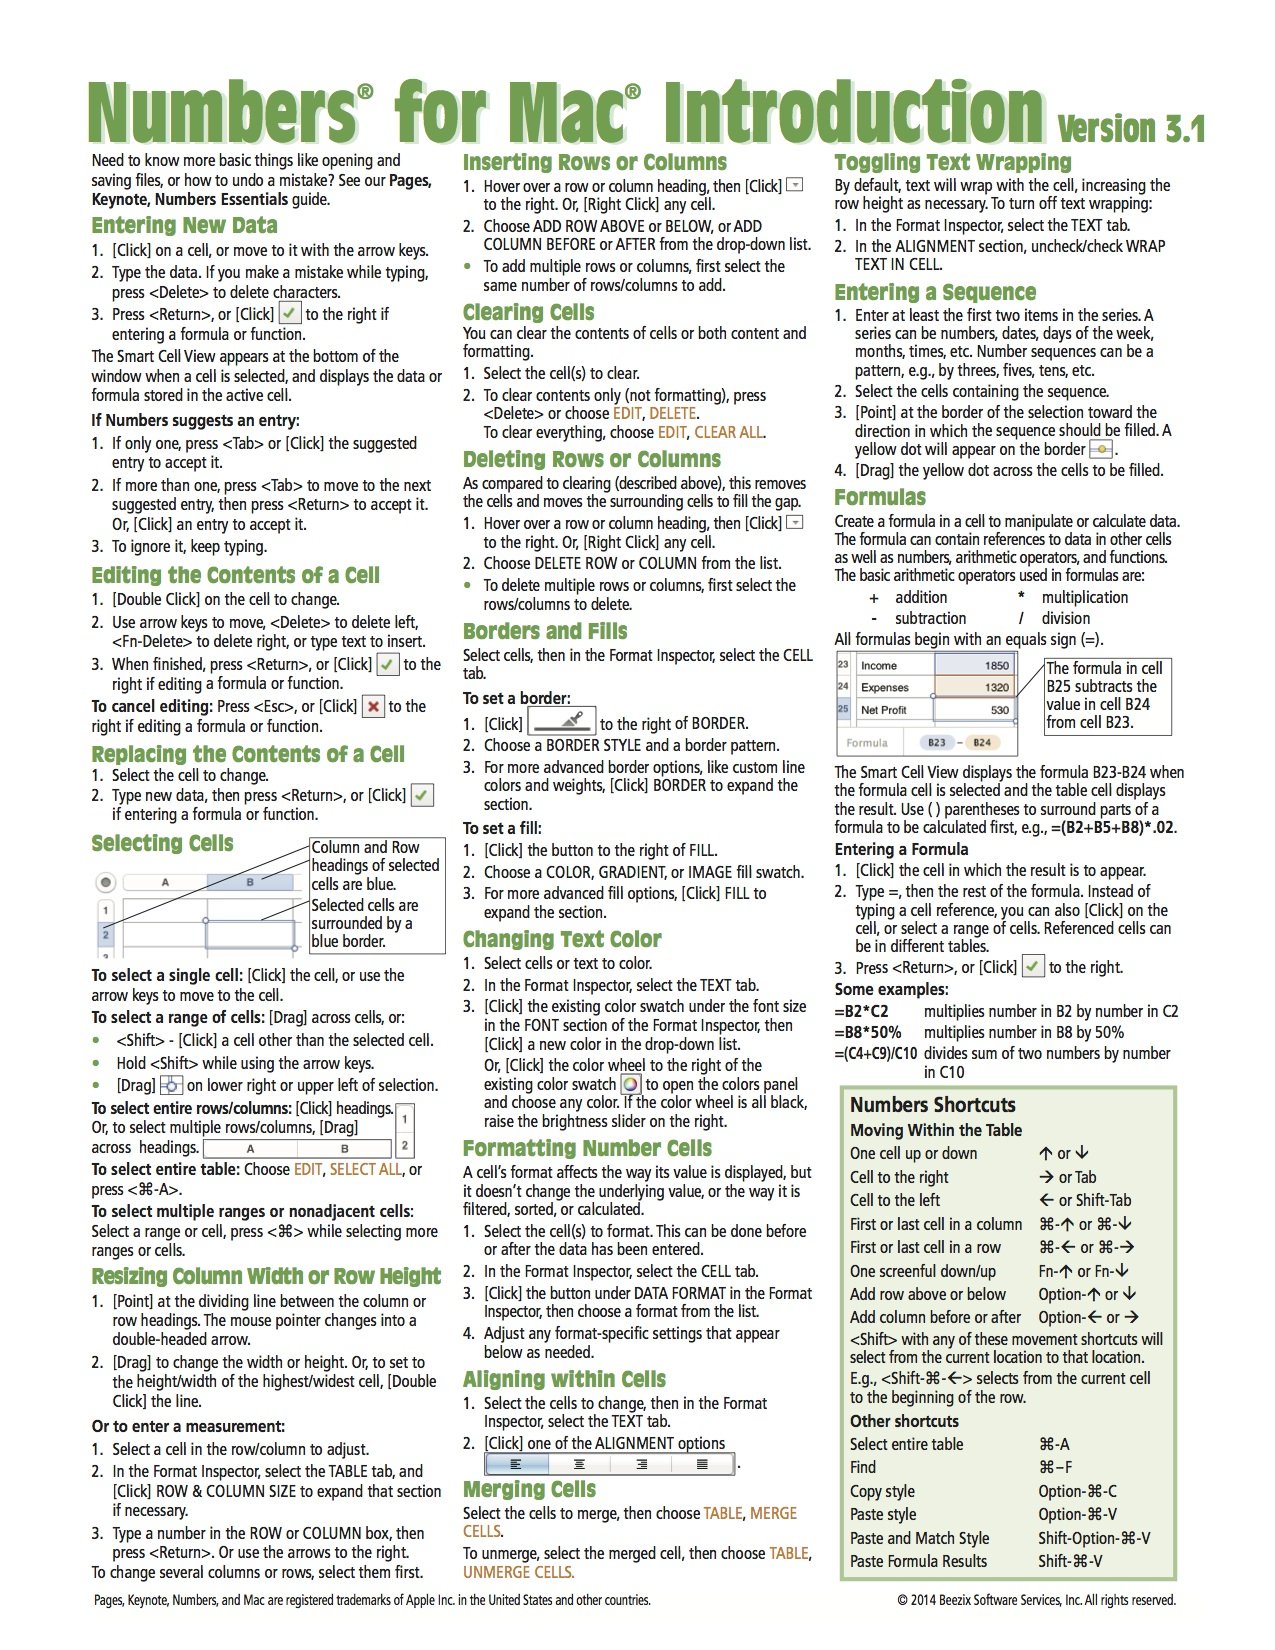 Numbers for Mac Quick Reference Guide, version 3.1-2: Introduction (Cheat Sheet of Instructions, Tips & Shortcuts - Laminated Card)